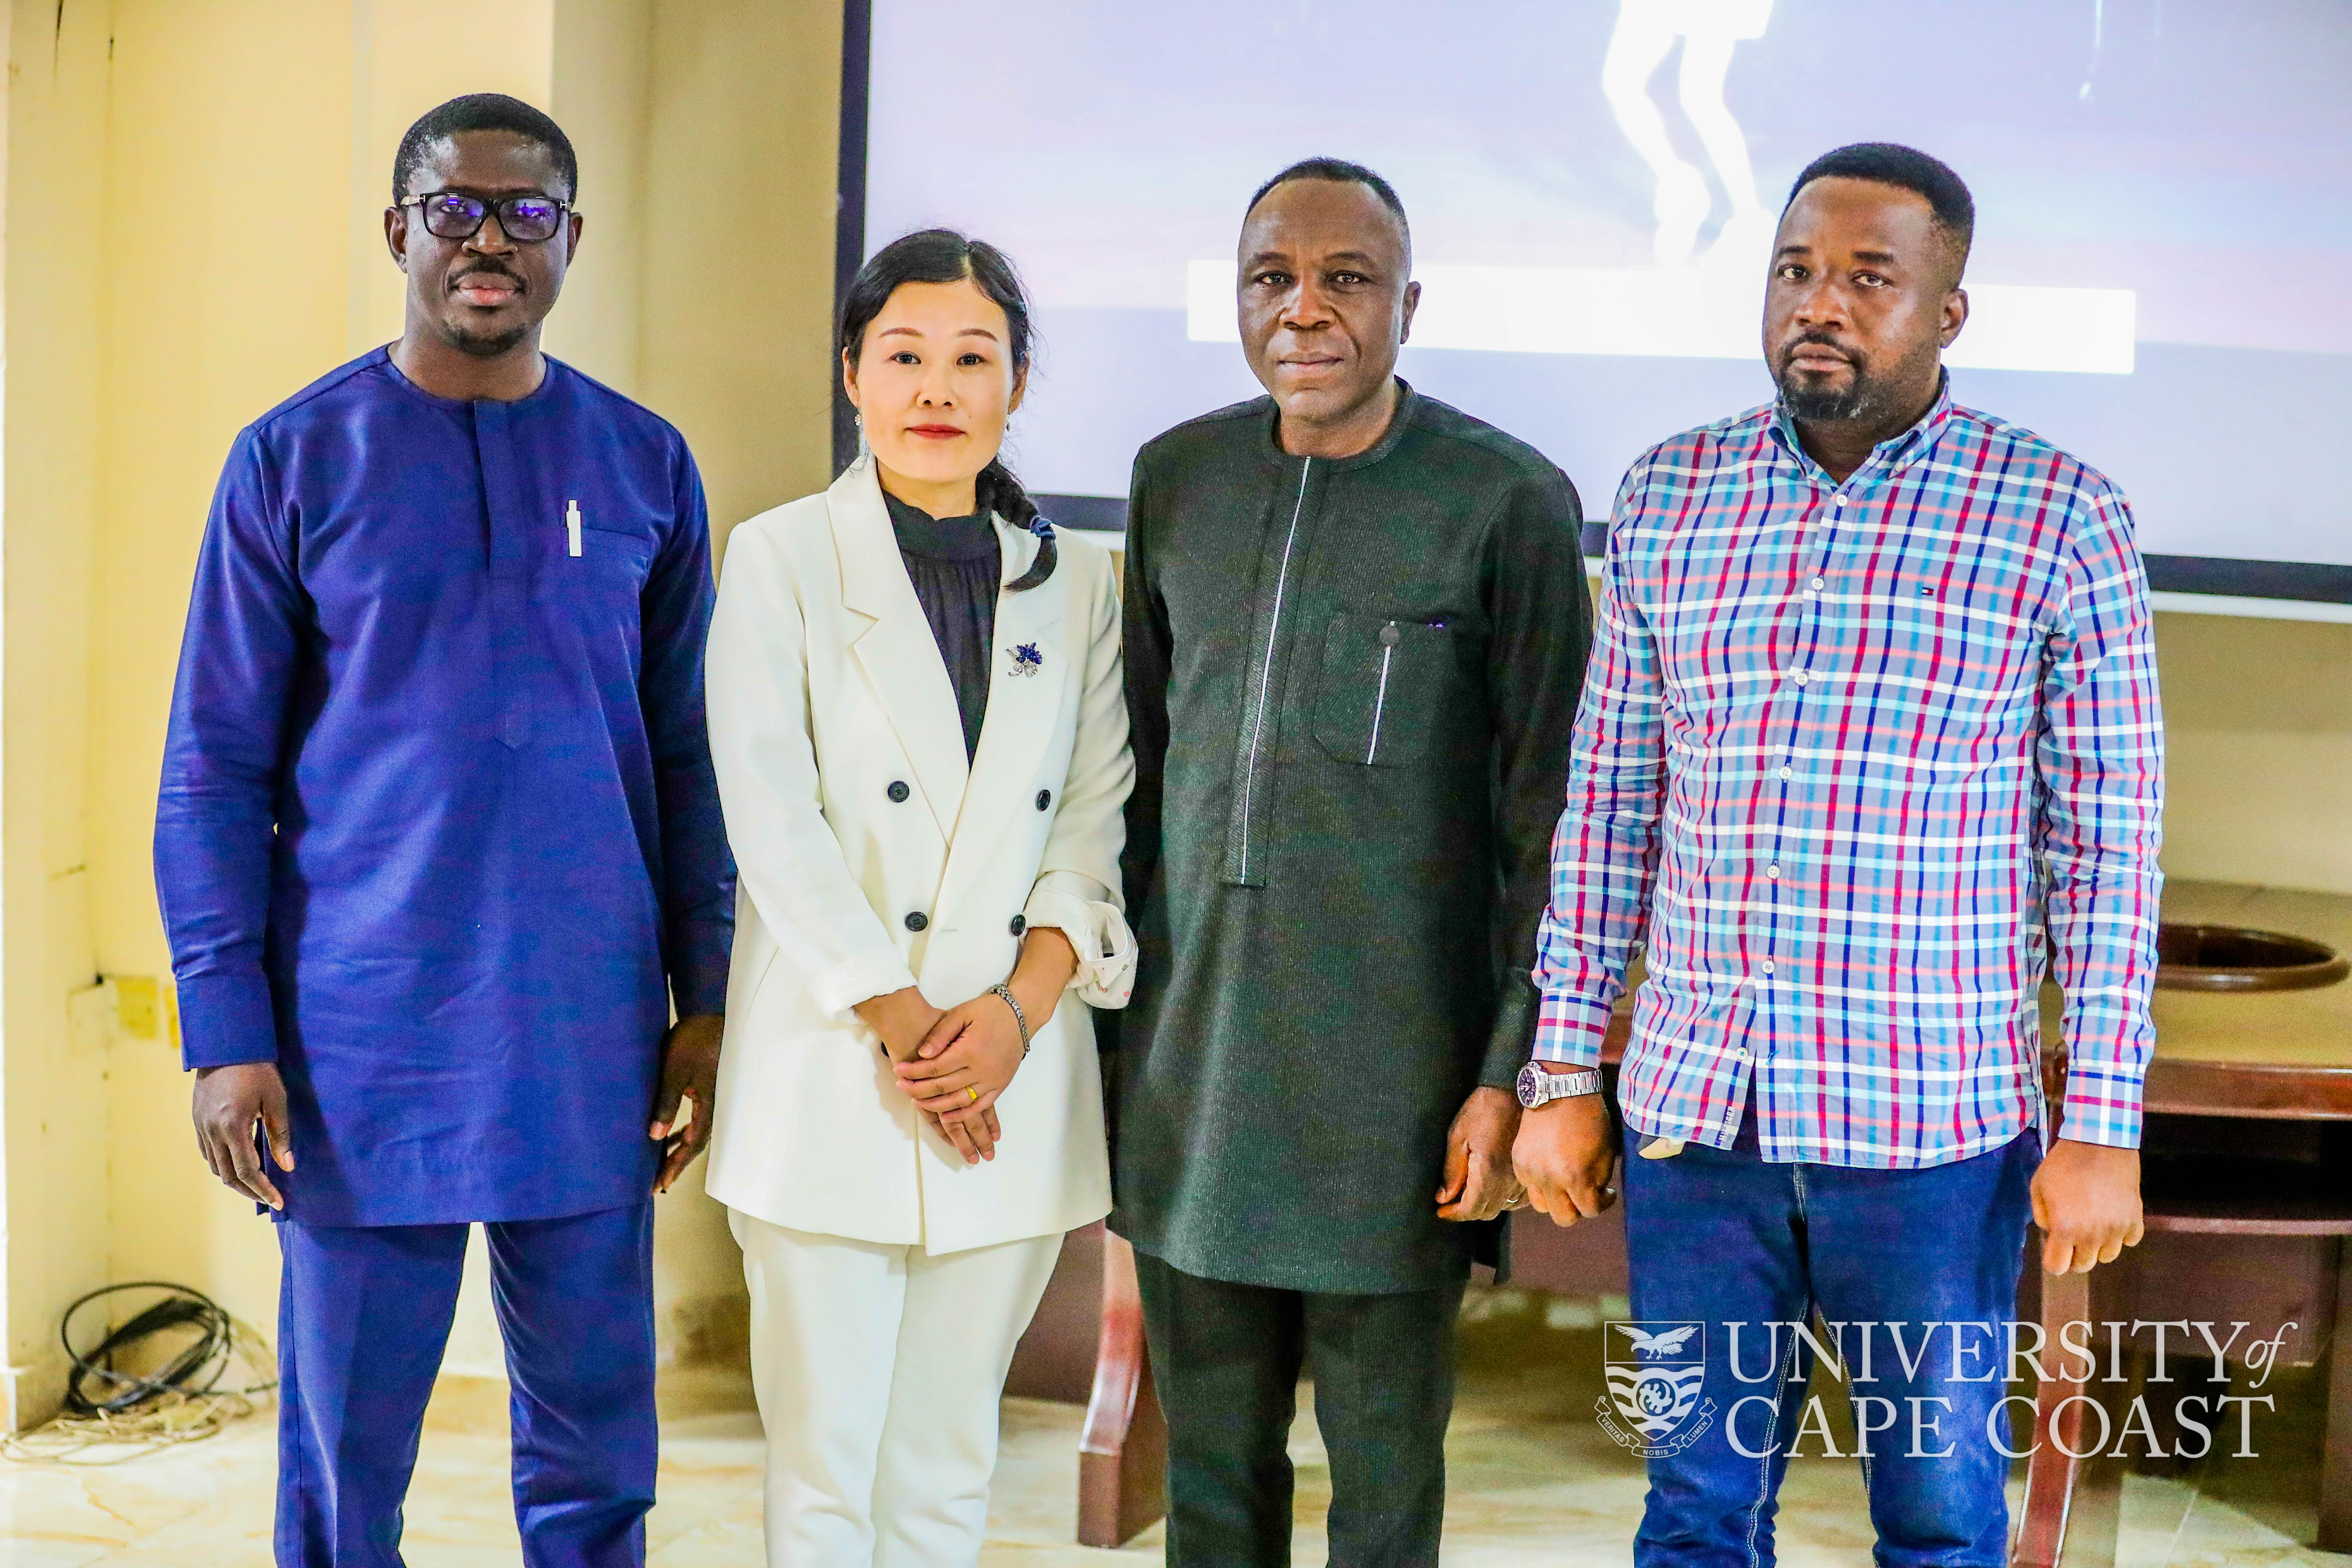 Mr. Divine Yao Ayidzoe (2nd right) in a photo with Chinese Director of UCC Confucius Institute, Prof. OU Yamei (2nd left) and Ghana Director of UCC Confucius Institute, Prof. Ishmael Mensah (left